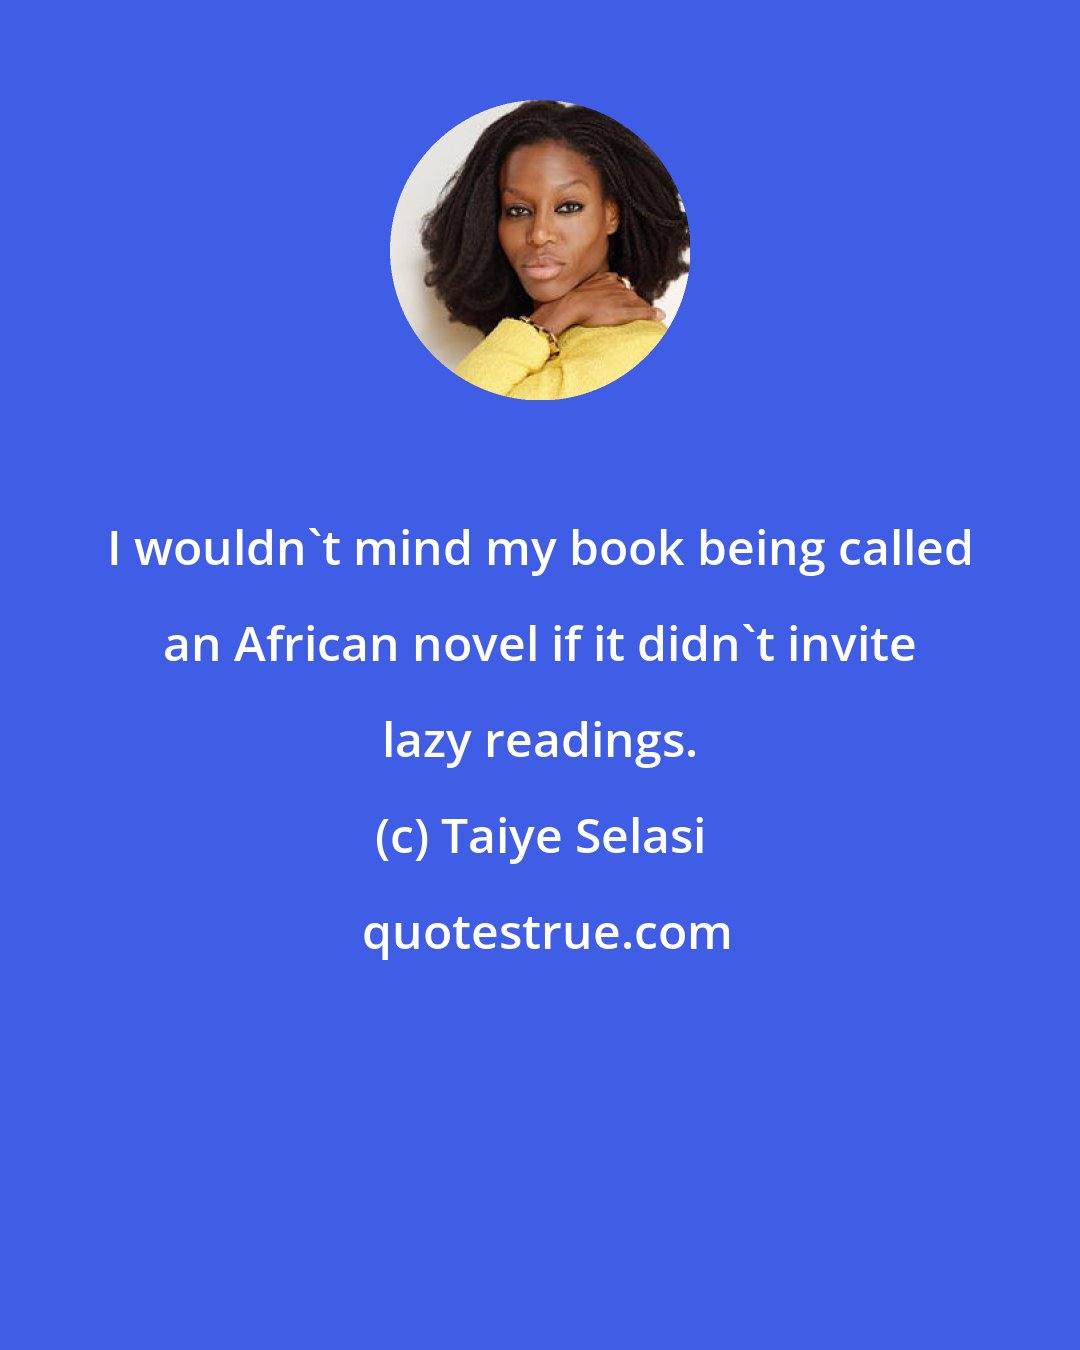 Taiye Selasi: I wouldn't mind my book being called an African novel if it didn't invite lazy readings.